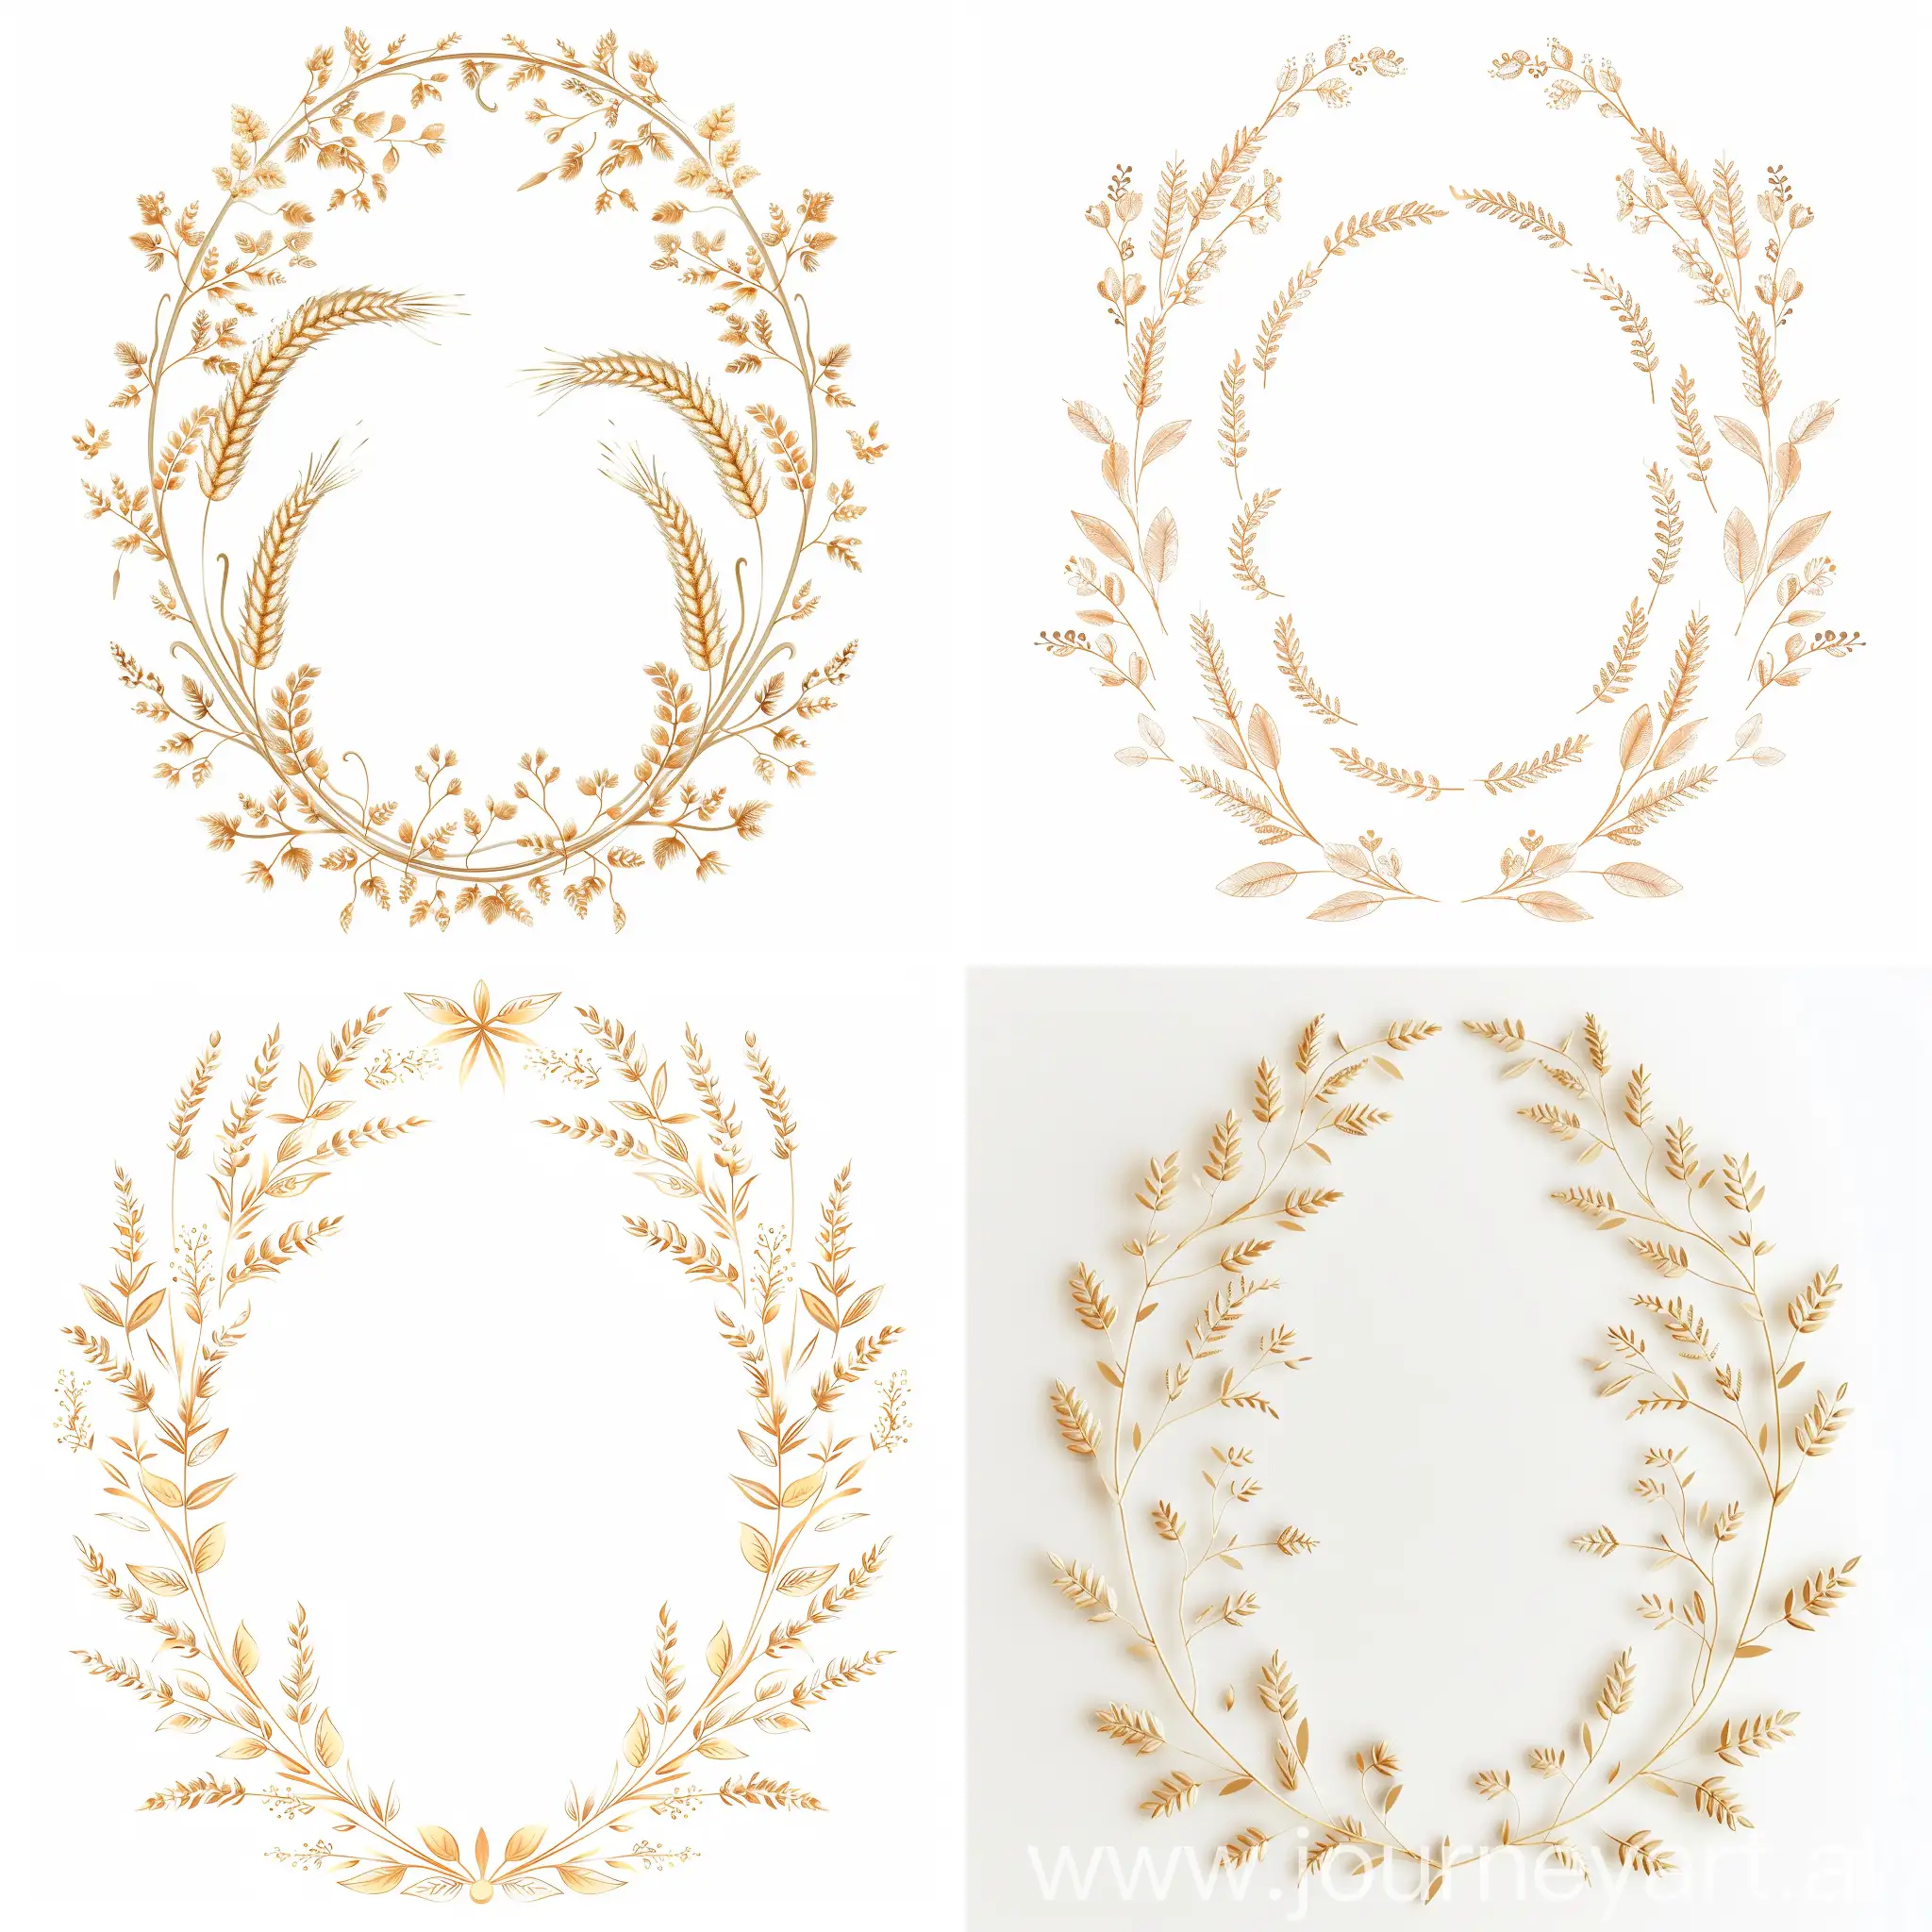 Delicate ornament along the contour of an oval made of translucent small wheat spikelets and wheat leaves, on a white background, flat illustration, vintage style, Victorian style